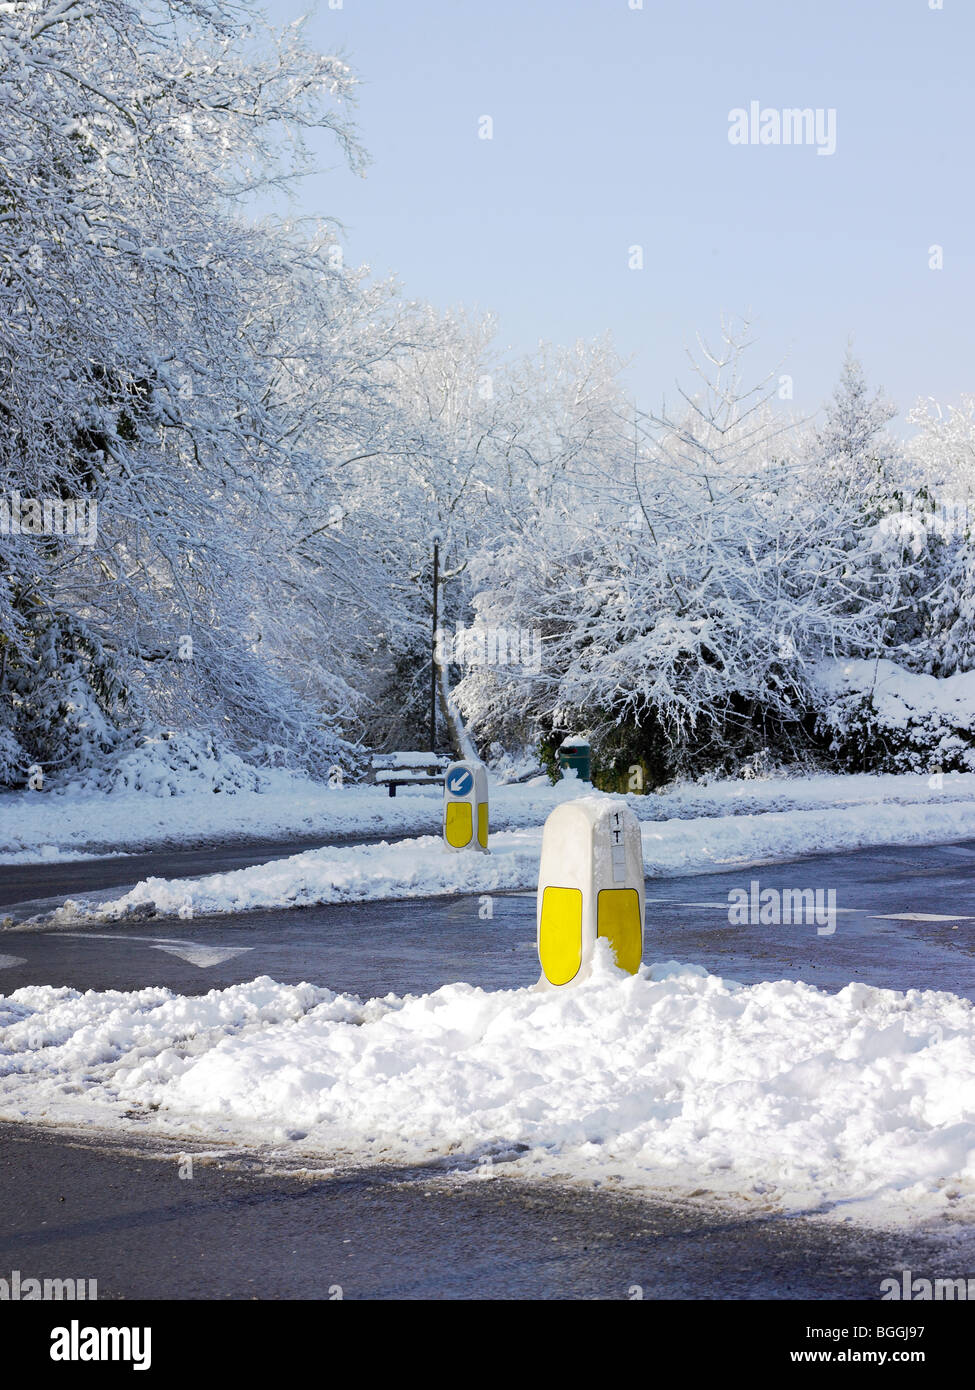 Two keep left bollards in the snow, with a cleared / slushy roads Stock Photo